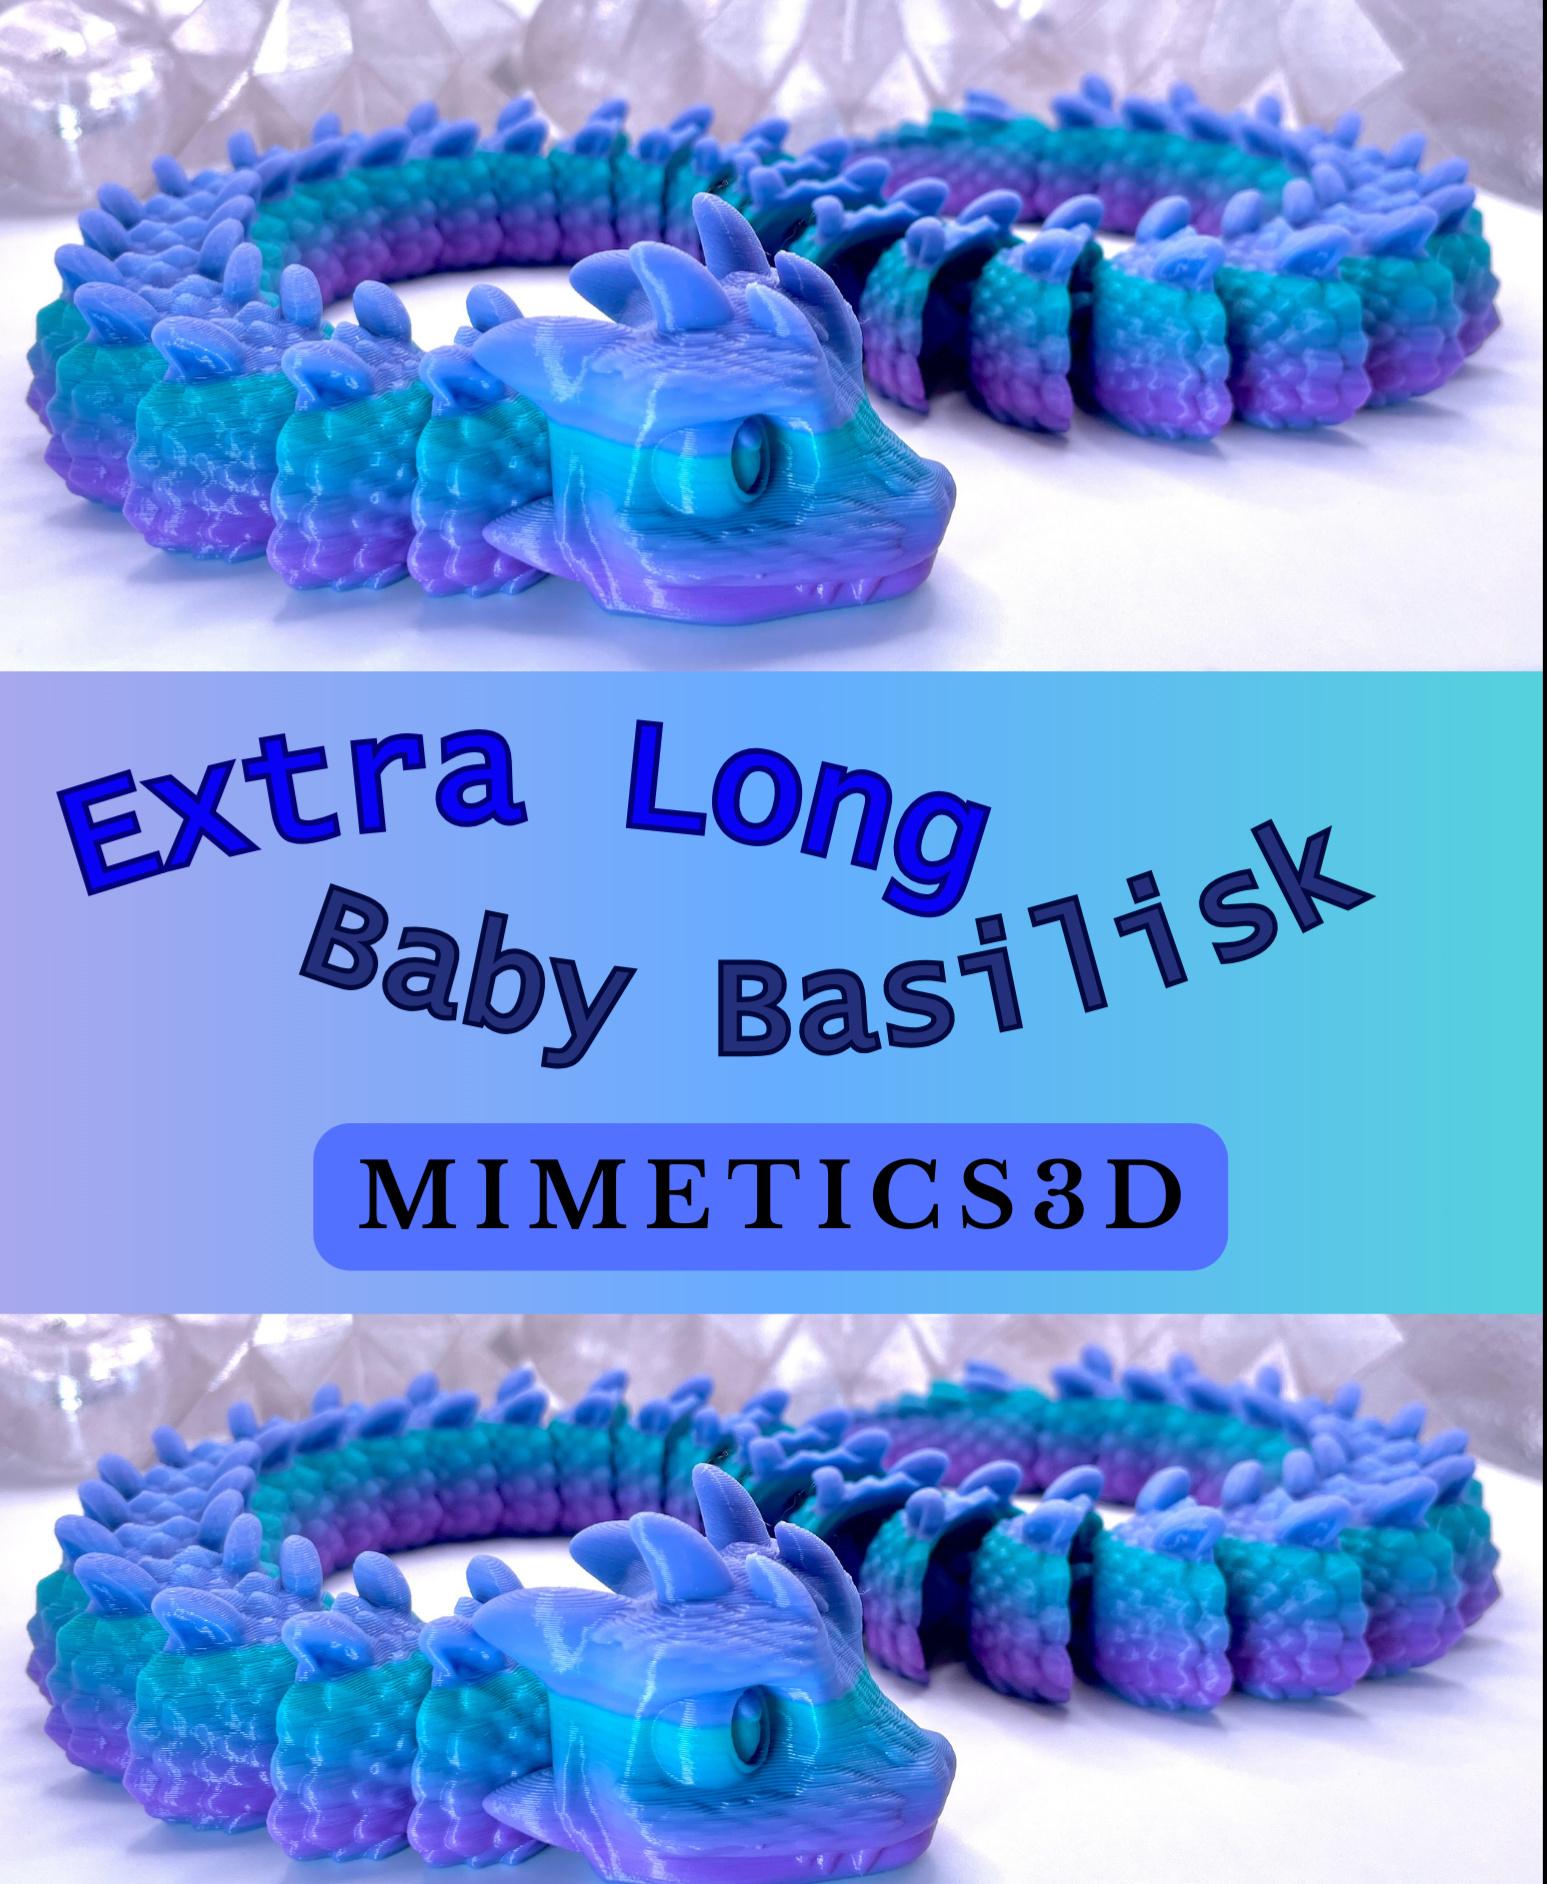 Baby Basilisk (Extra Long)  - Love this in CookieCad Mermaid with a last-minute finish in ProtoPasta Cotton Candy Nebula! - 3d model